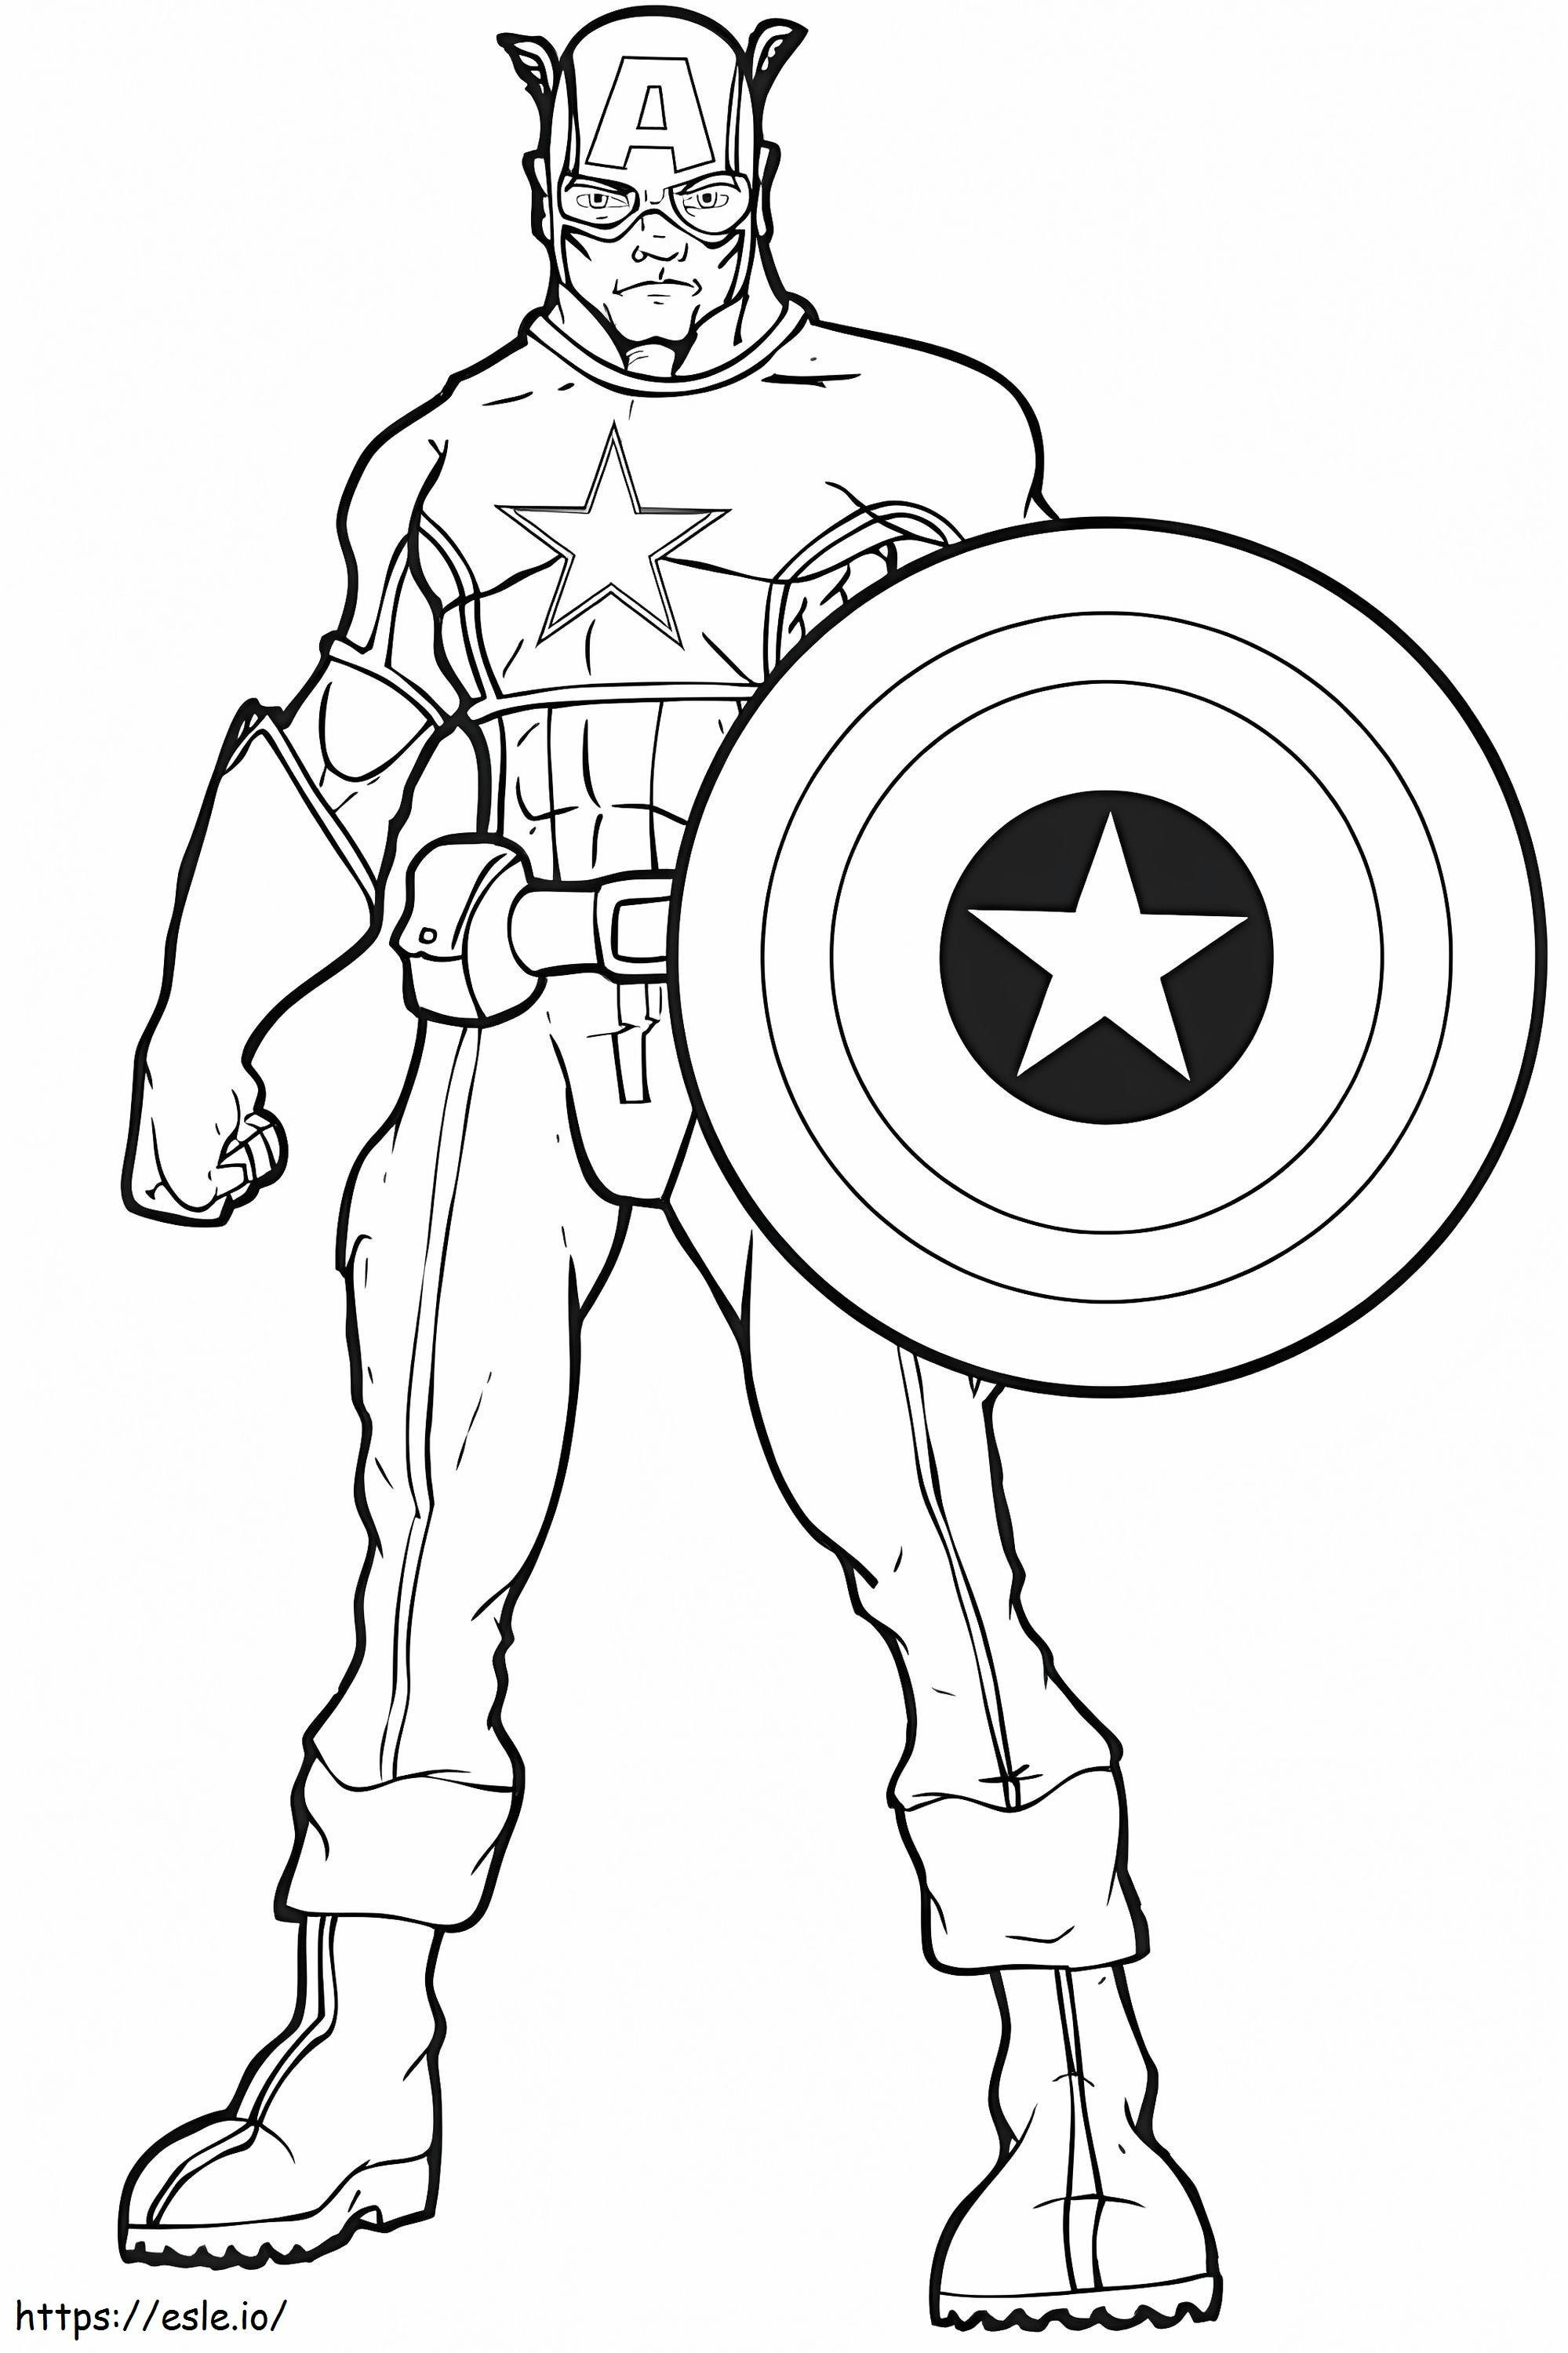 Awesome Cartoon Of Captain America coloring page